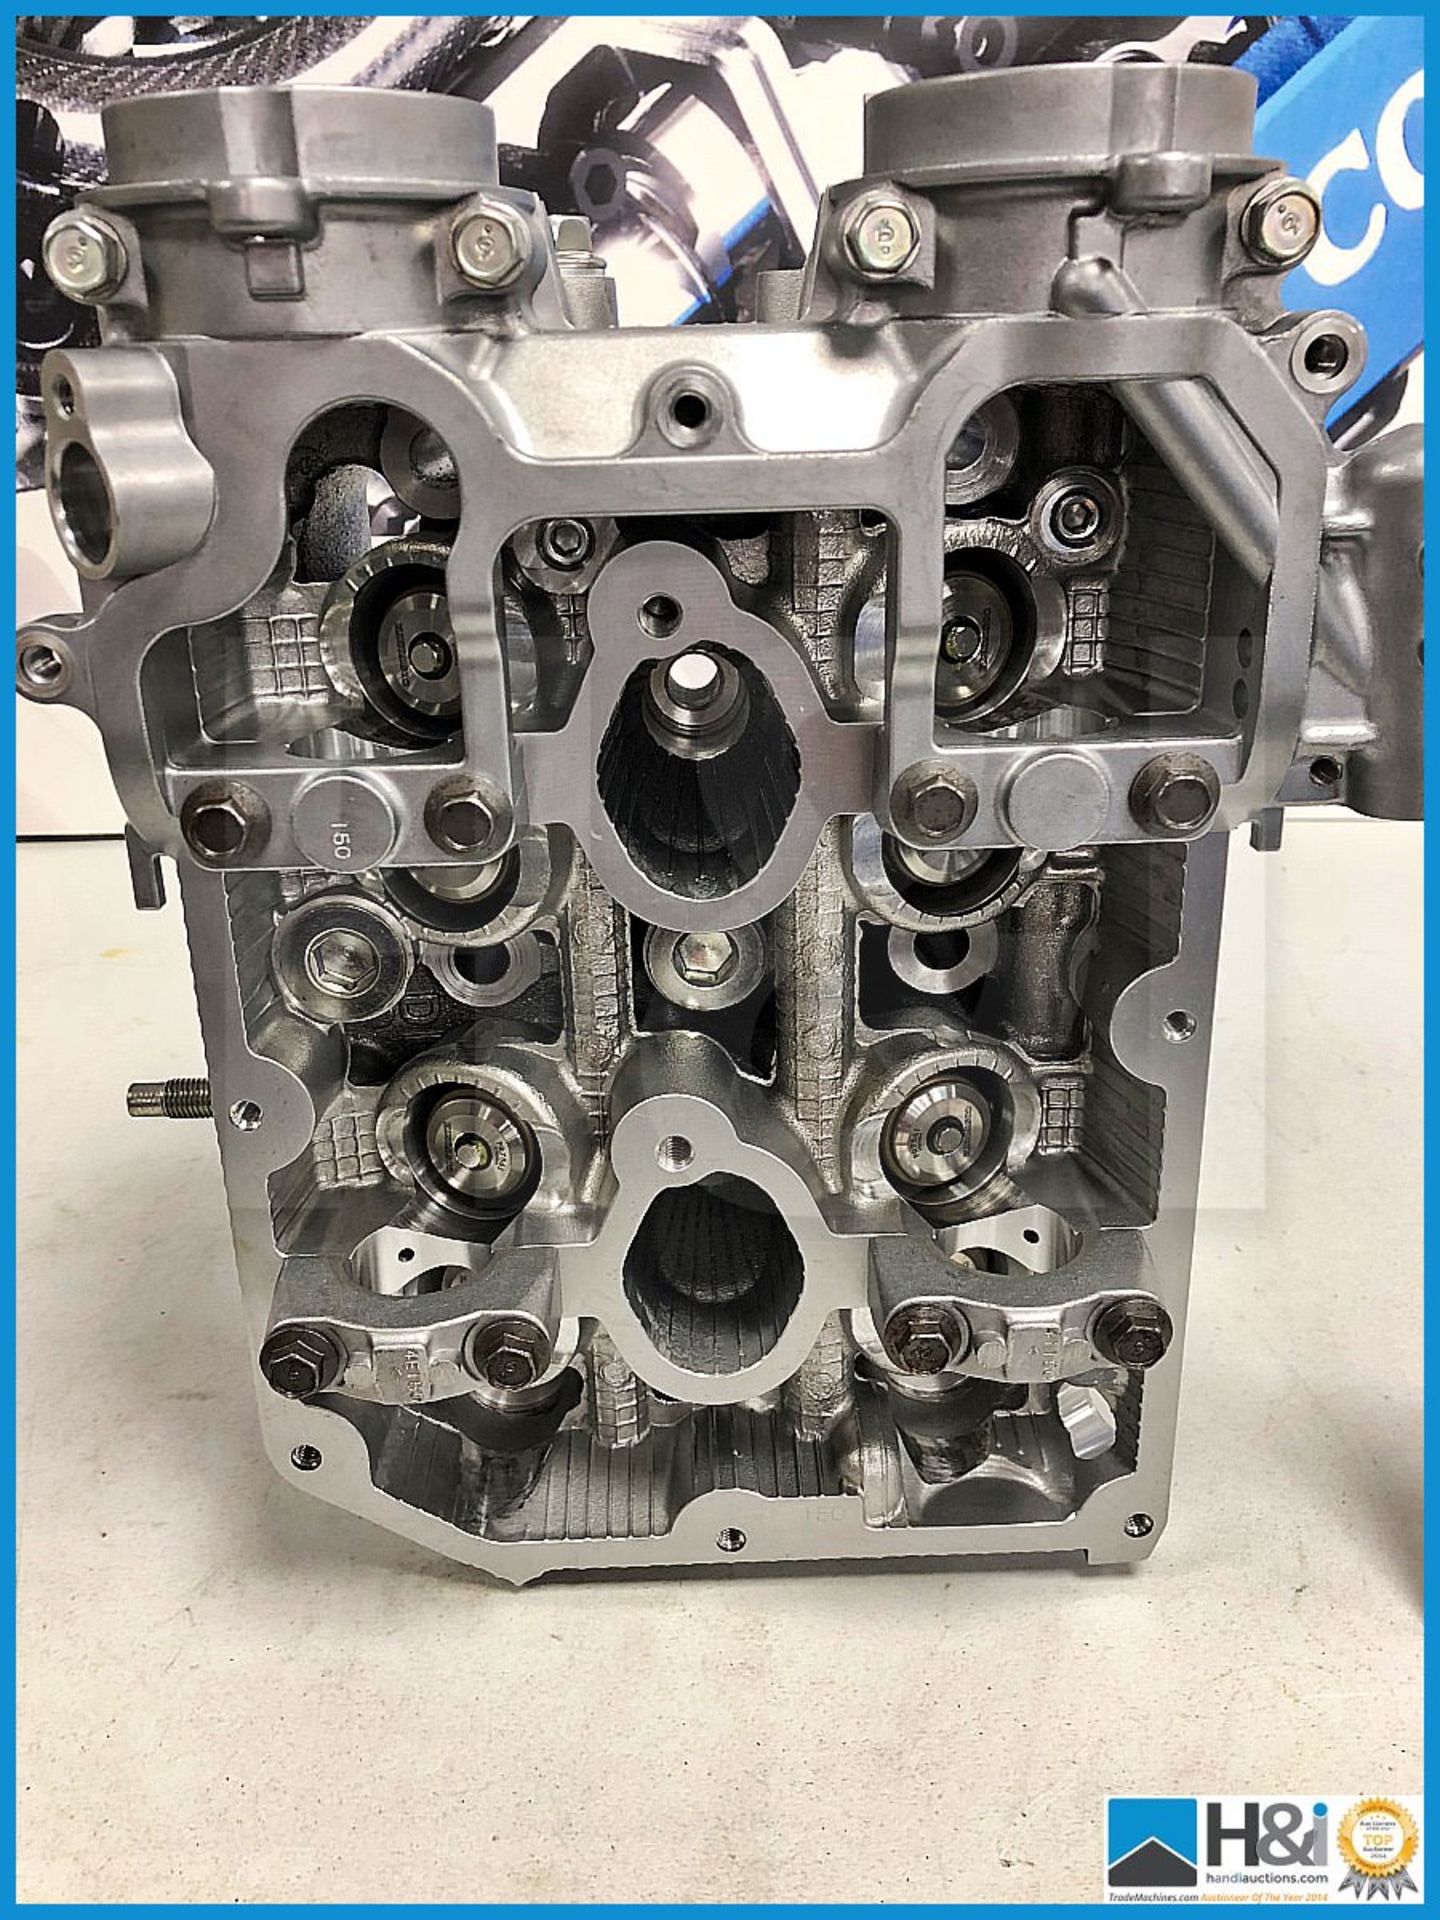 1 x Cylinder head assembly for Subaru STI, LH, 08. Appears to be fitted with valves. Code: 20004546. - Image 4 of 5